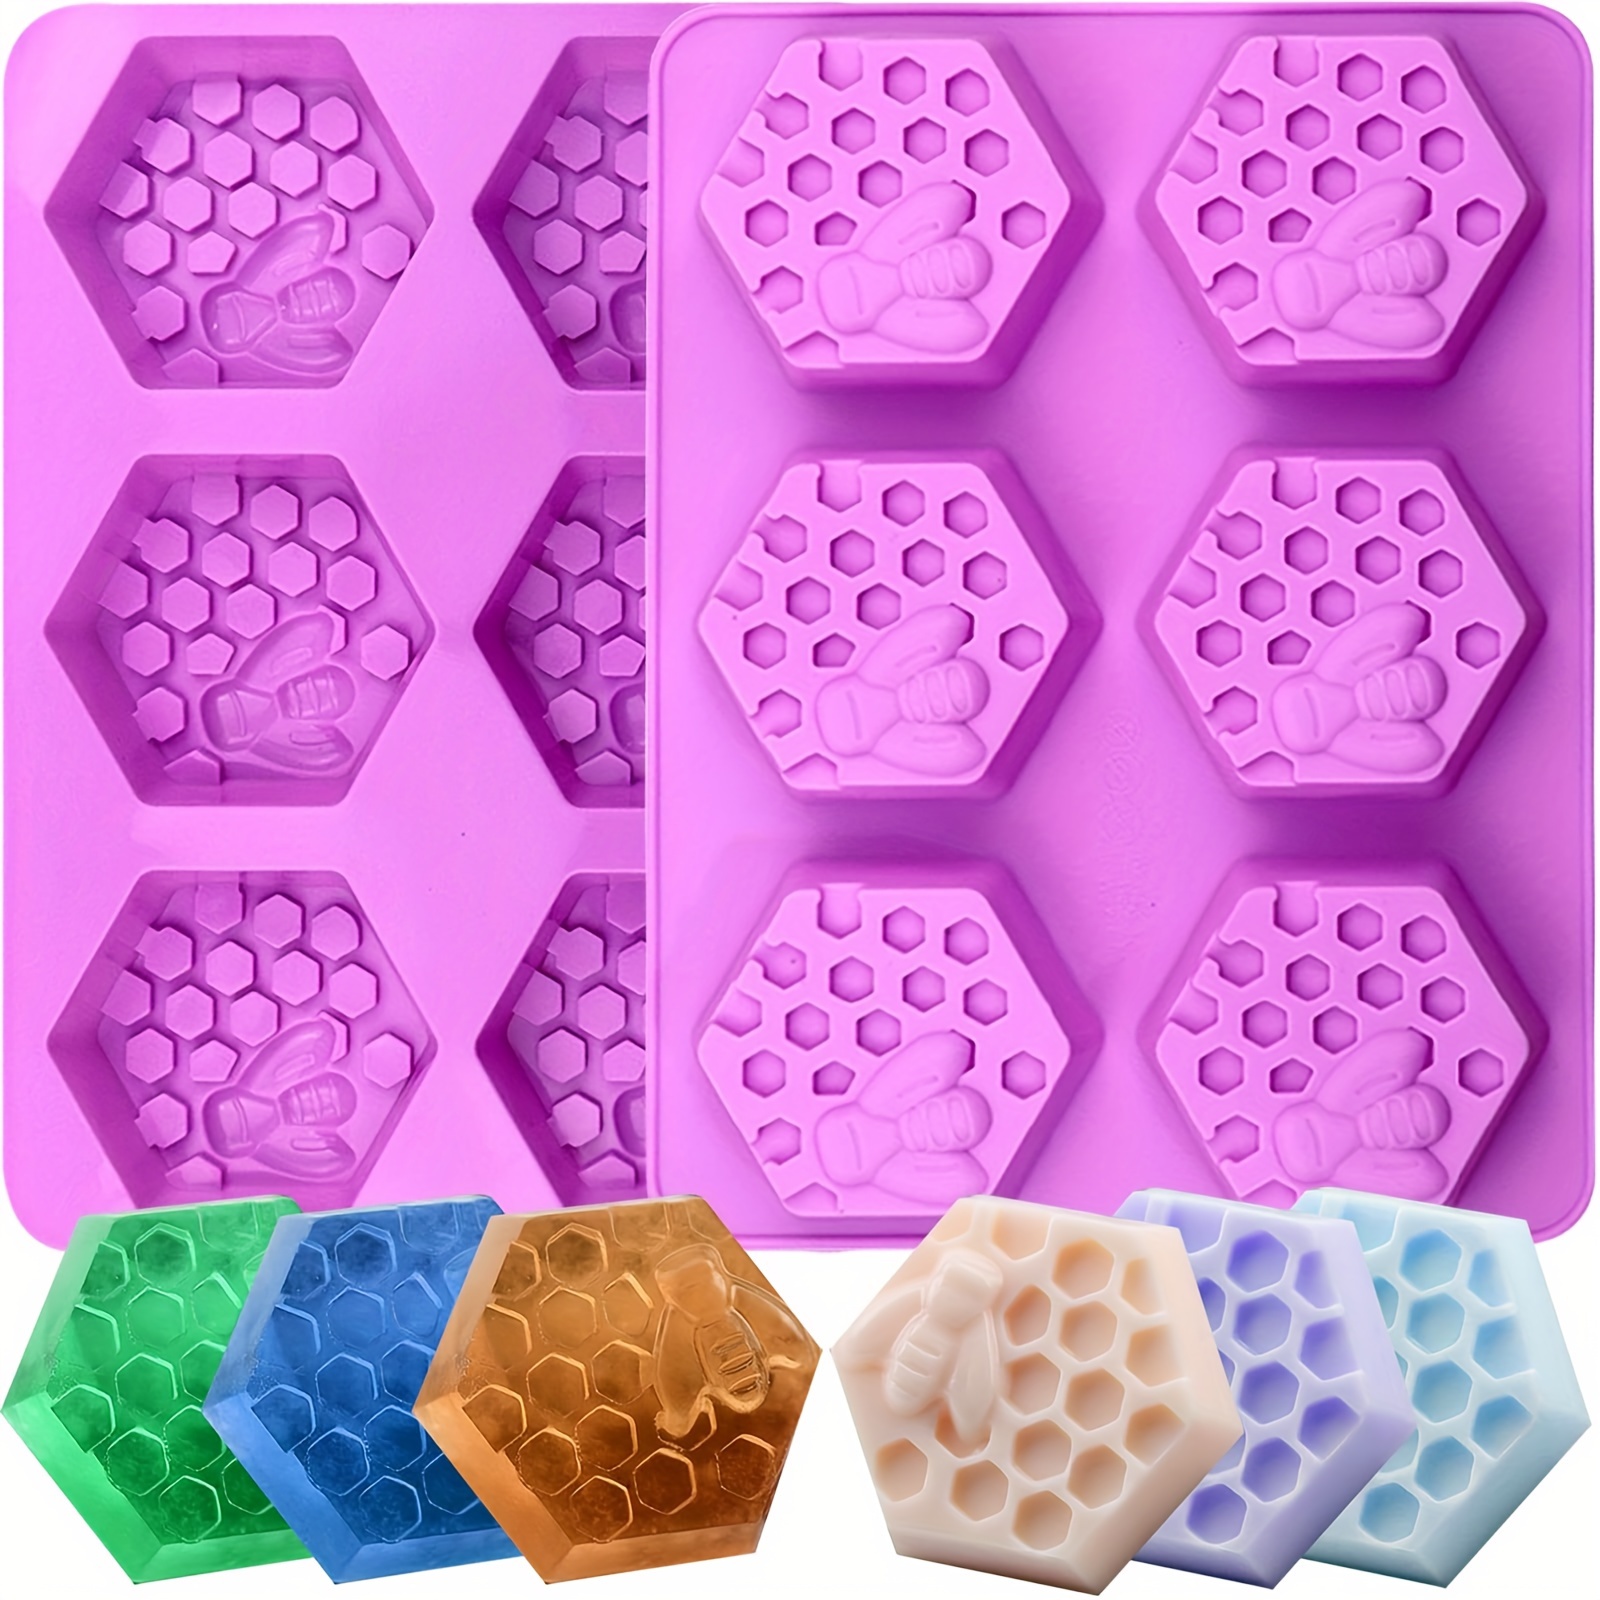 Bee Honeycomb Silicone Soap Mold 19 Cavities Honeycomb Soap Mold Bee  Silicone Molds Plaster Mold Ice Mold Silicone Mold Chocolate Mold 